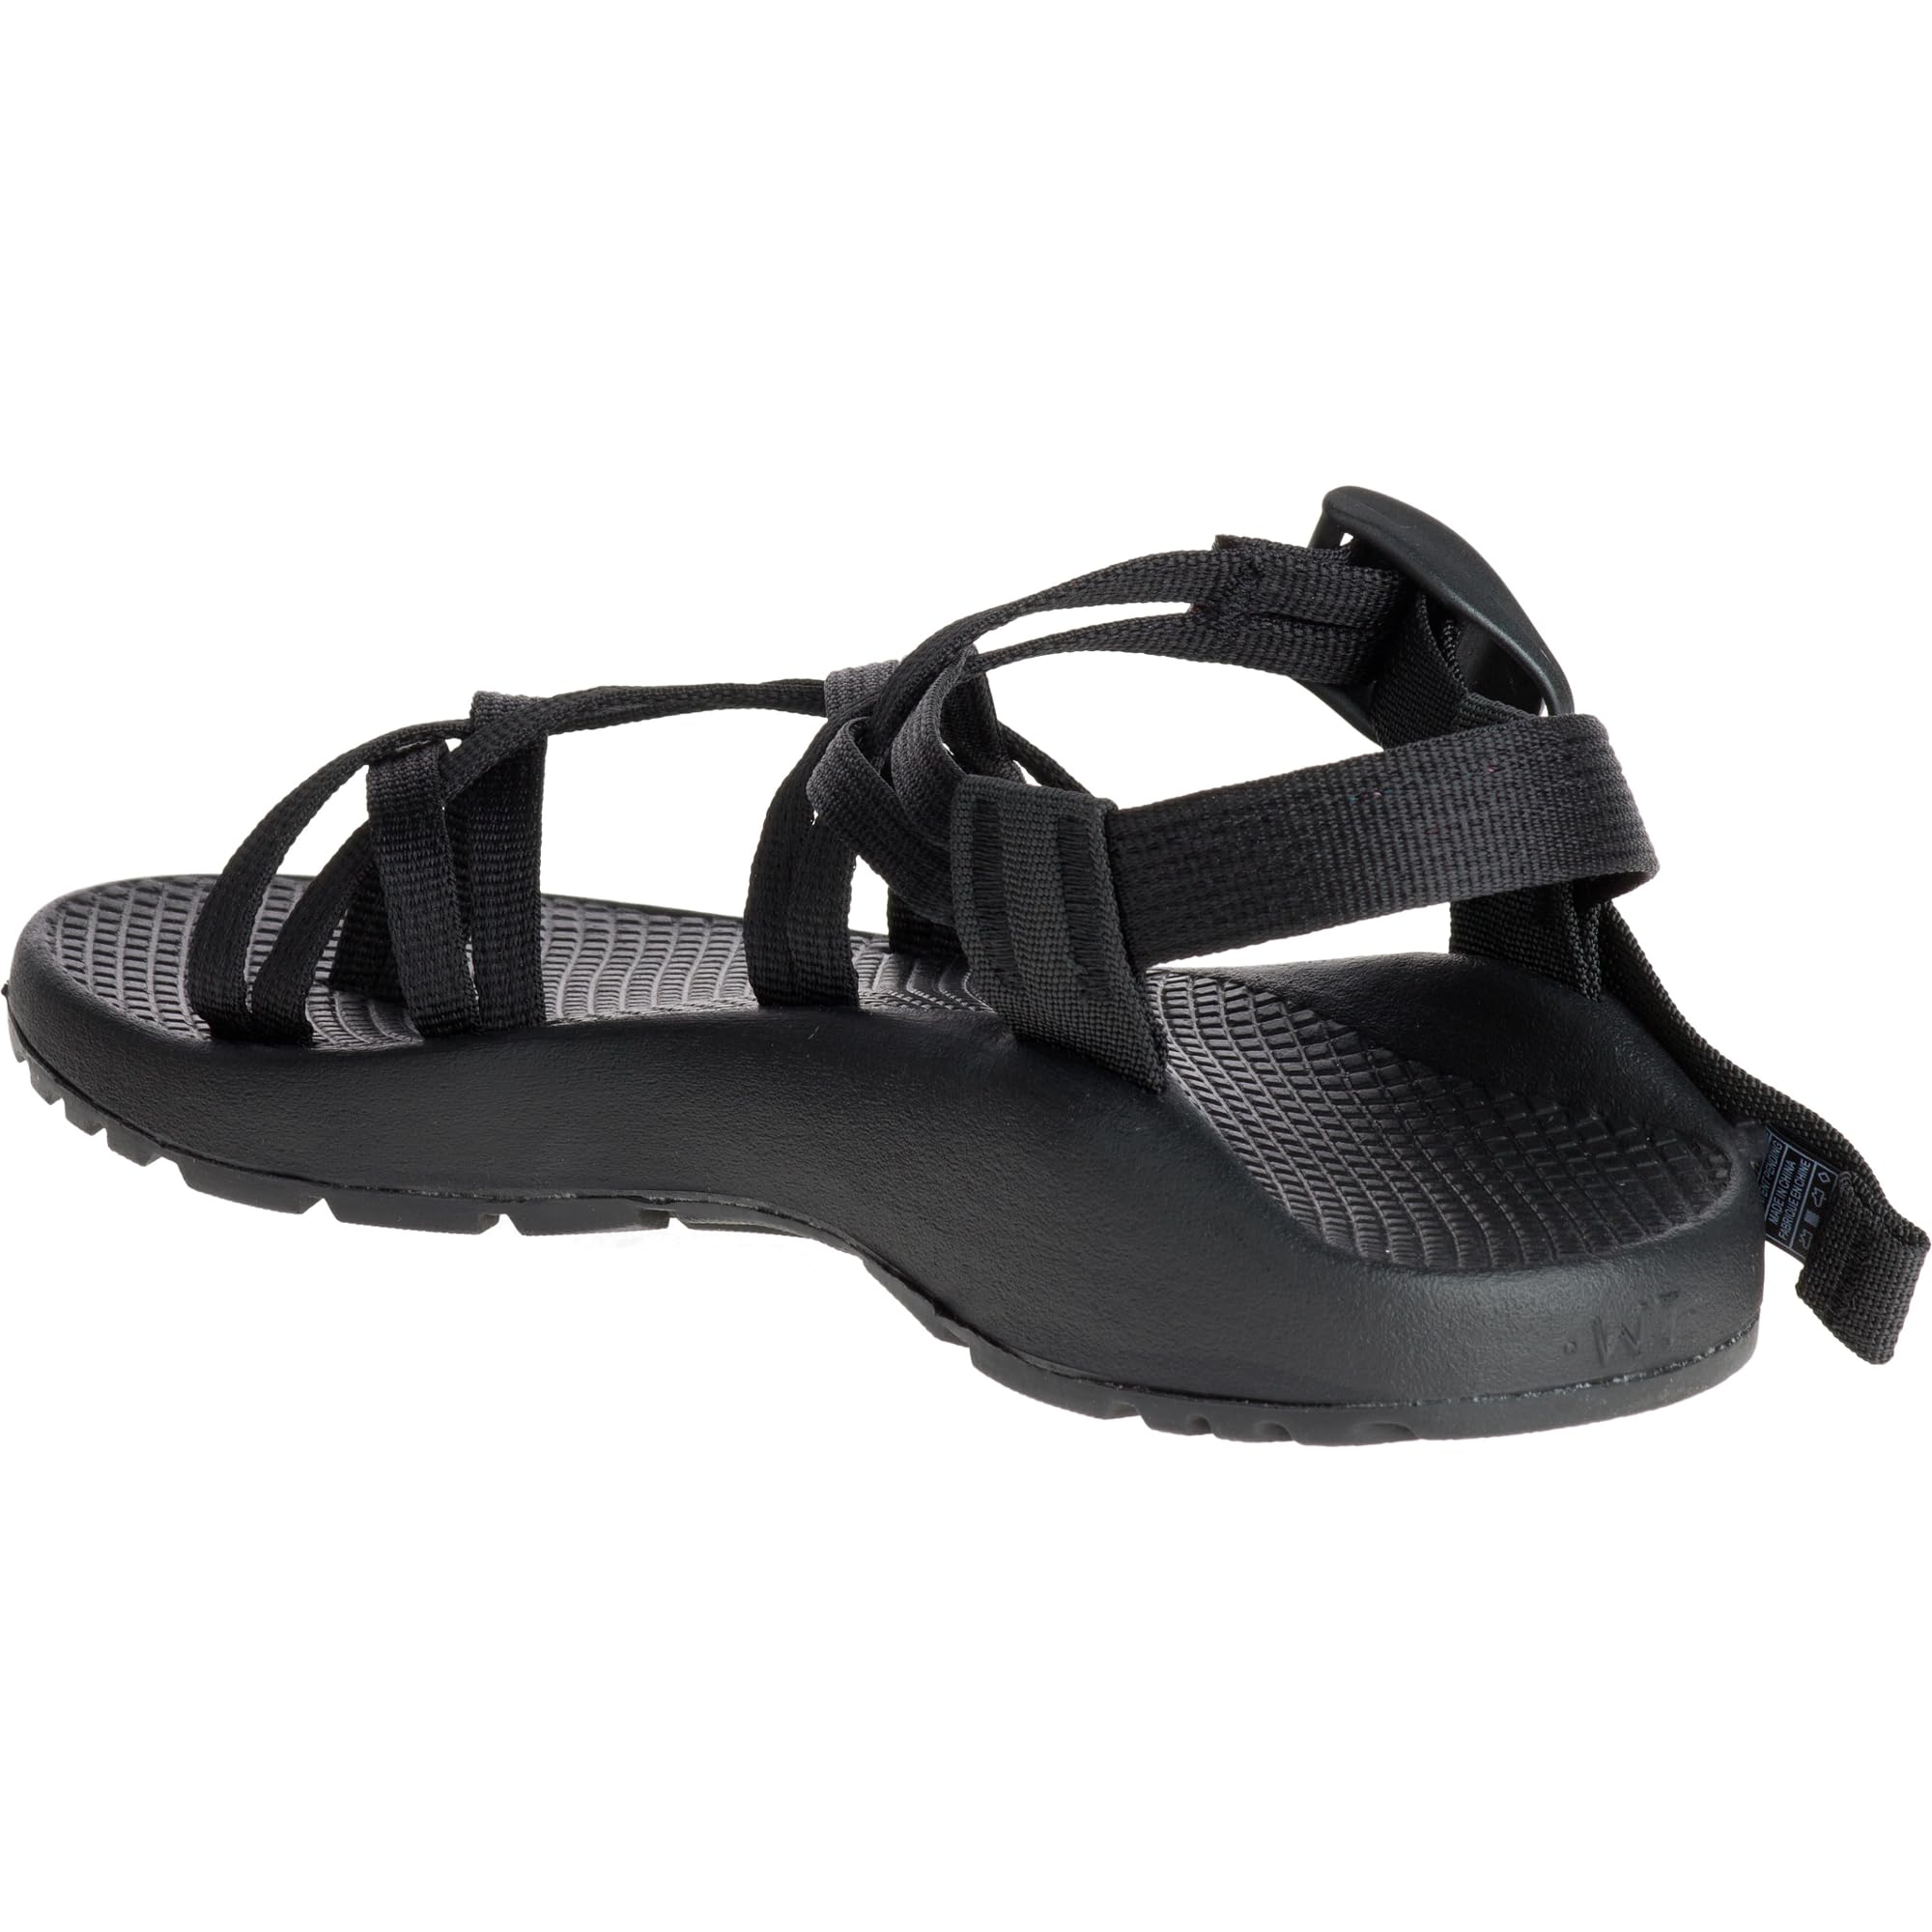 Chaco Womens ZX/2 Classic, With Toe Loop, Outdoor Sandal, Black 6 W